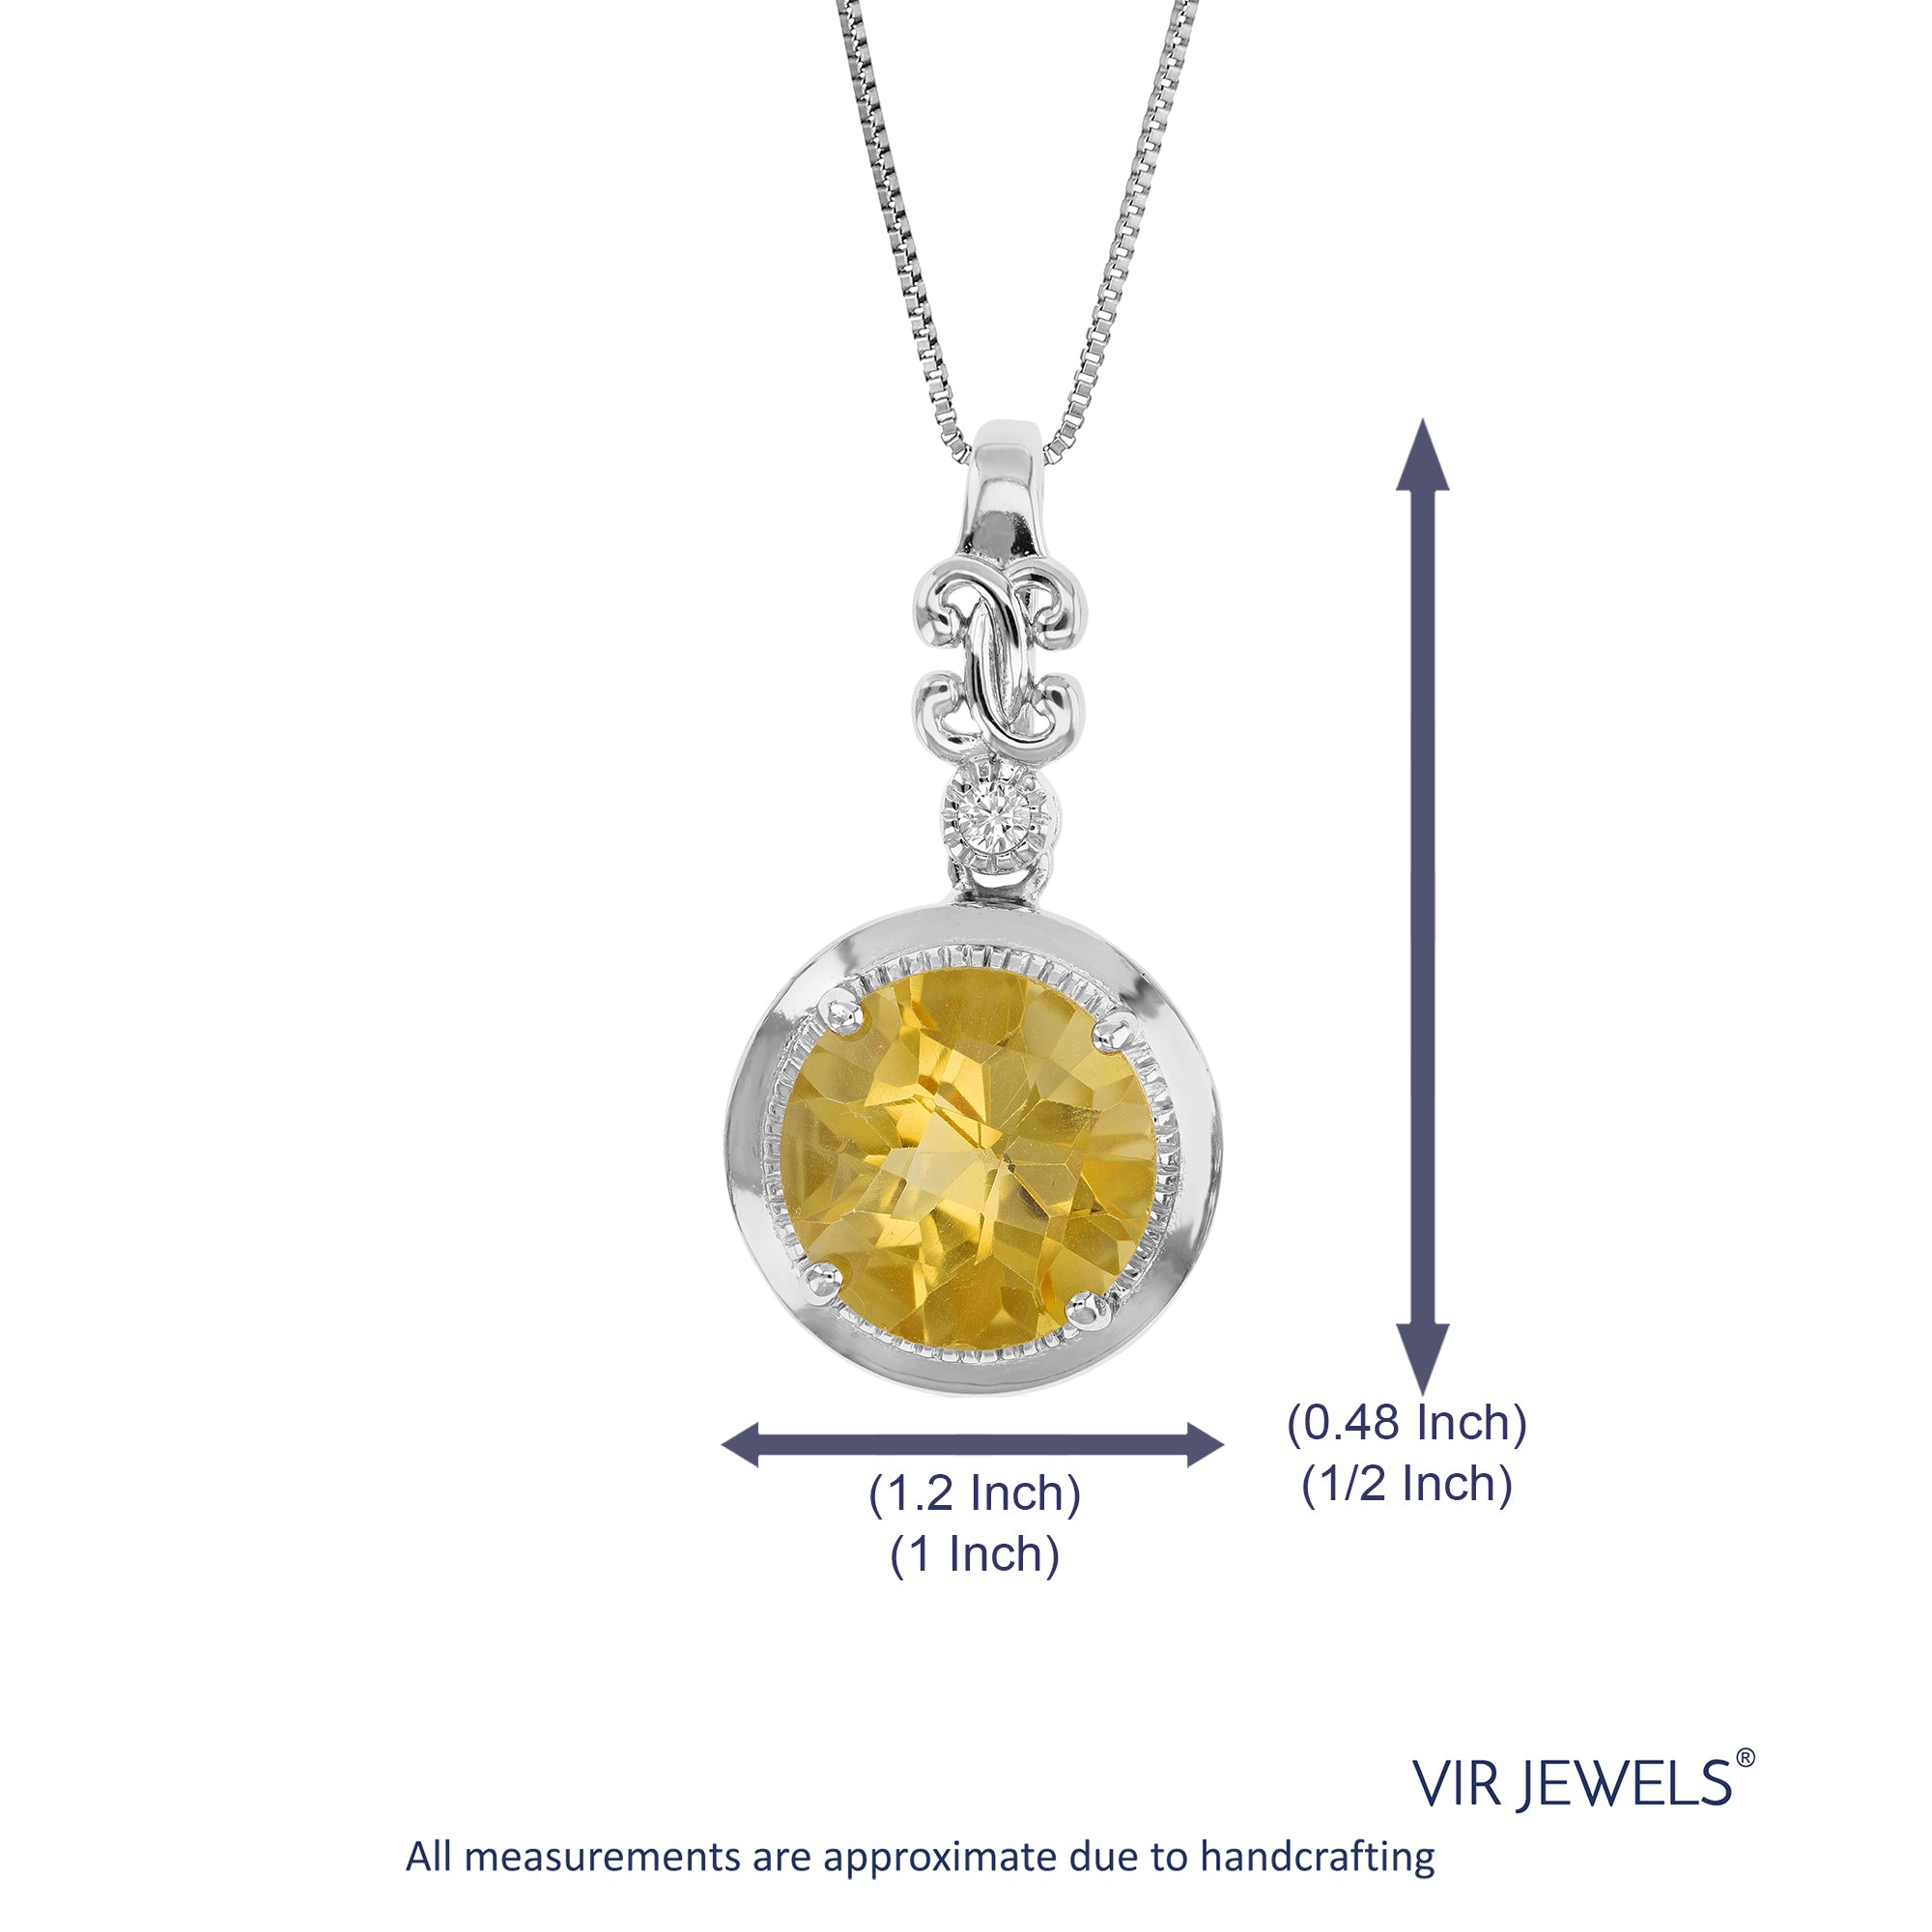 3.50 cttw Pendant Necklace, Citrine Pendant Necklace for Women in .925 Sterling Silver with Rhodium, 18 Inch Chain, Prong Setting